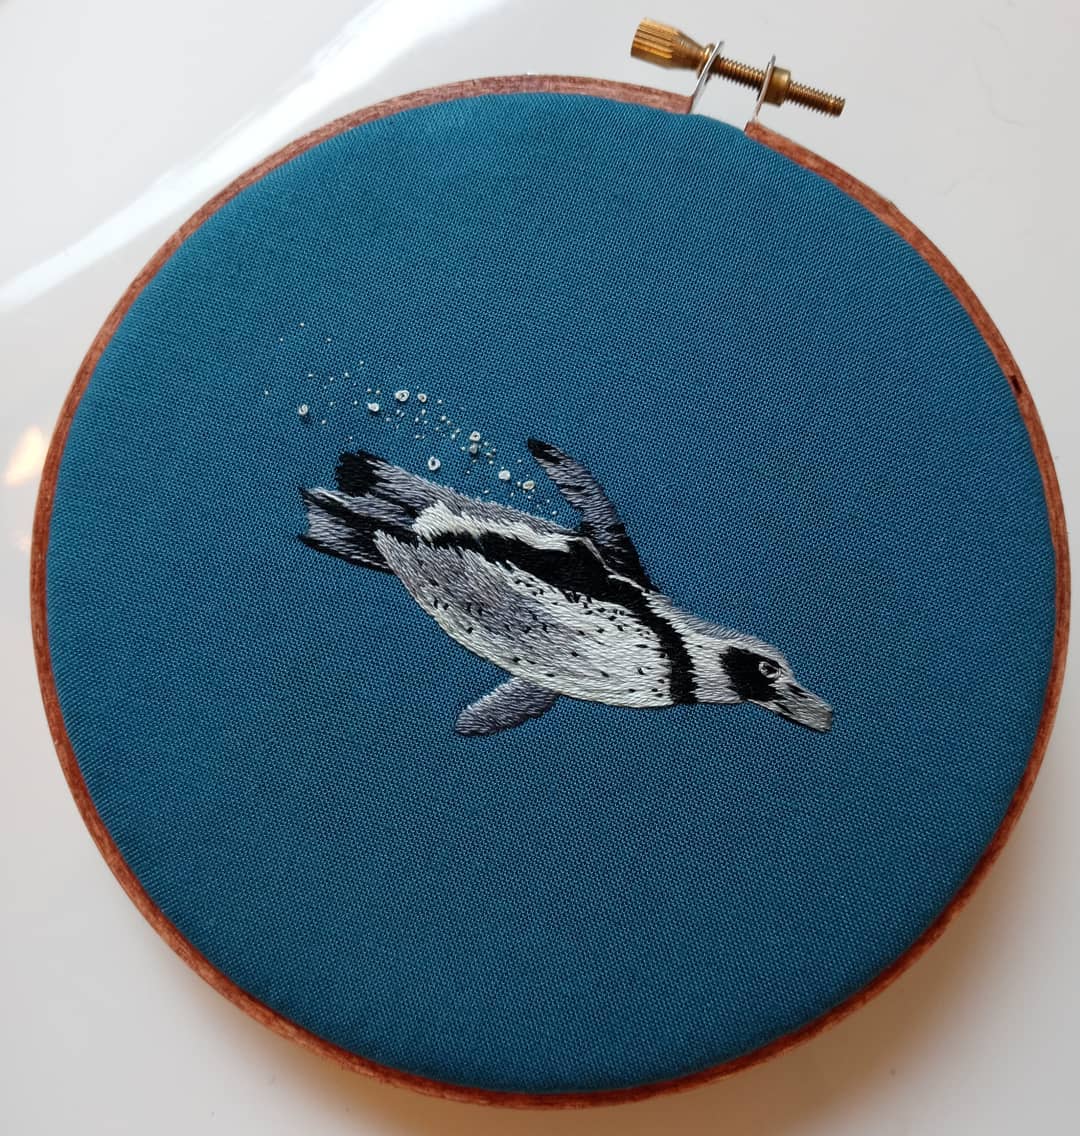 Gorgeous Embroideries Of Animals Plunging Into The Waters By Megan Zaniewski 4